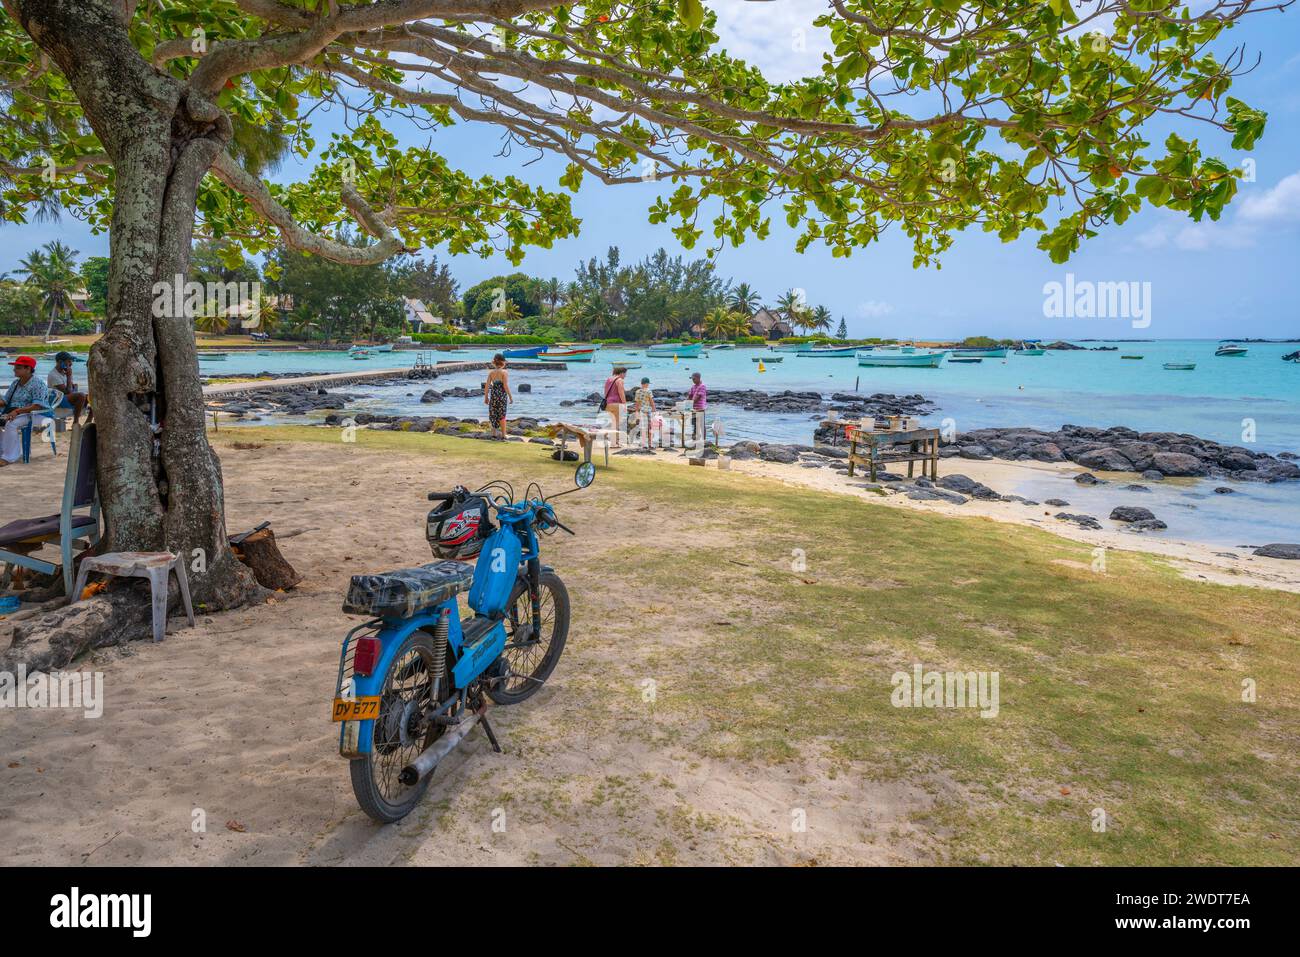 View of beach and traders on sunny day in Cap Malheureux, Mauritius, Indian Ocean, Africa Stock Photo